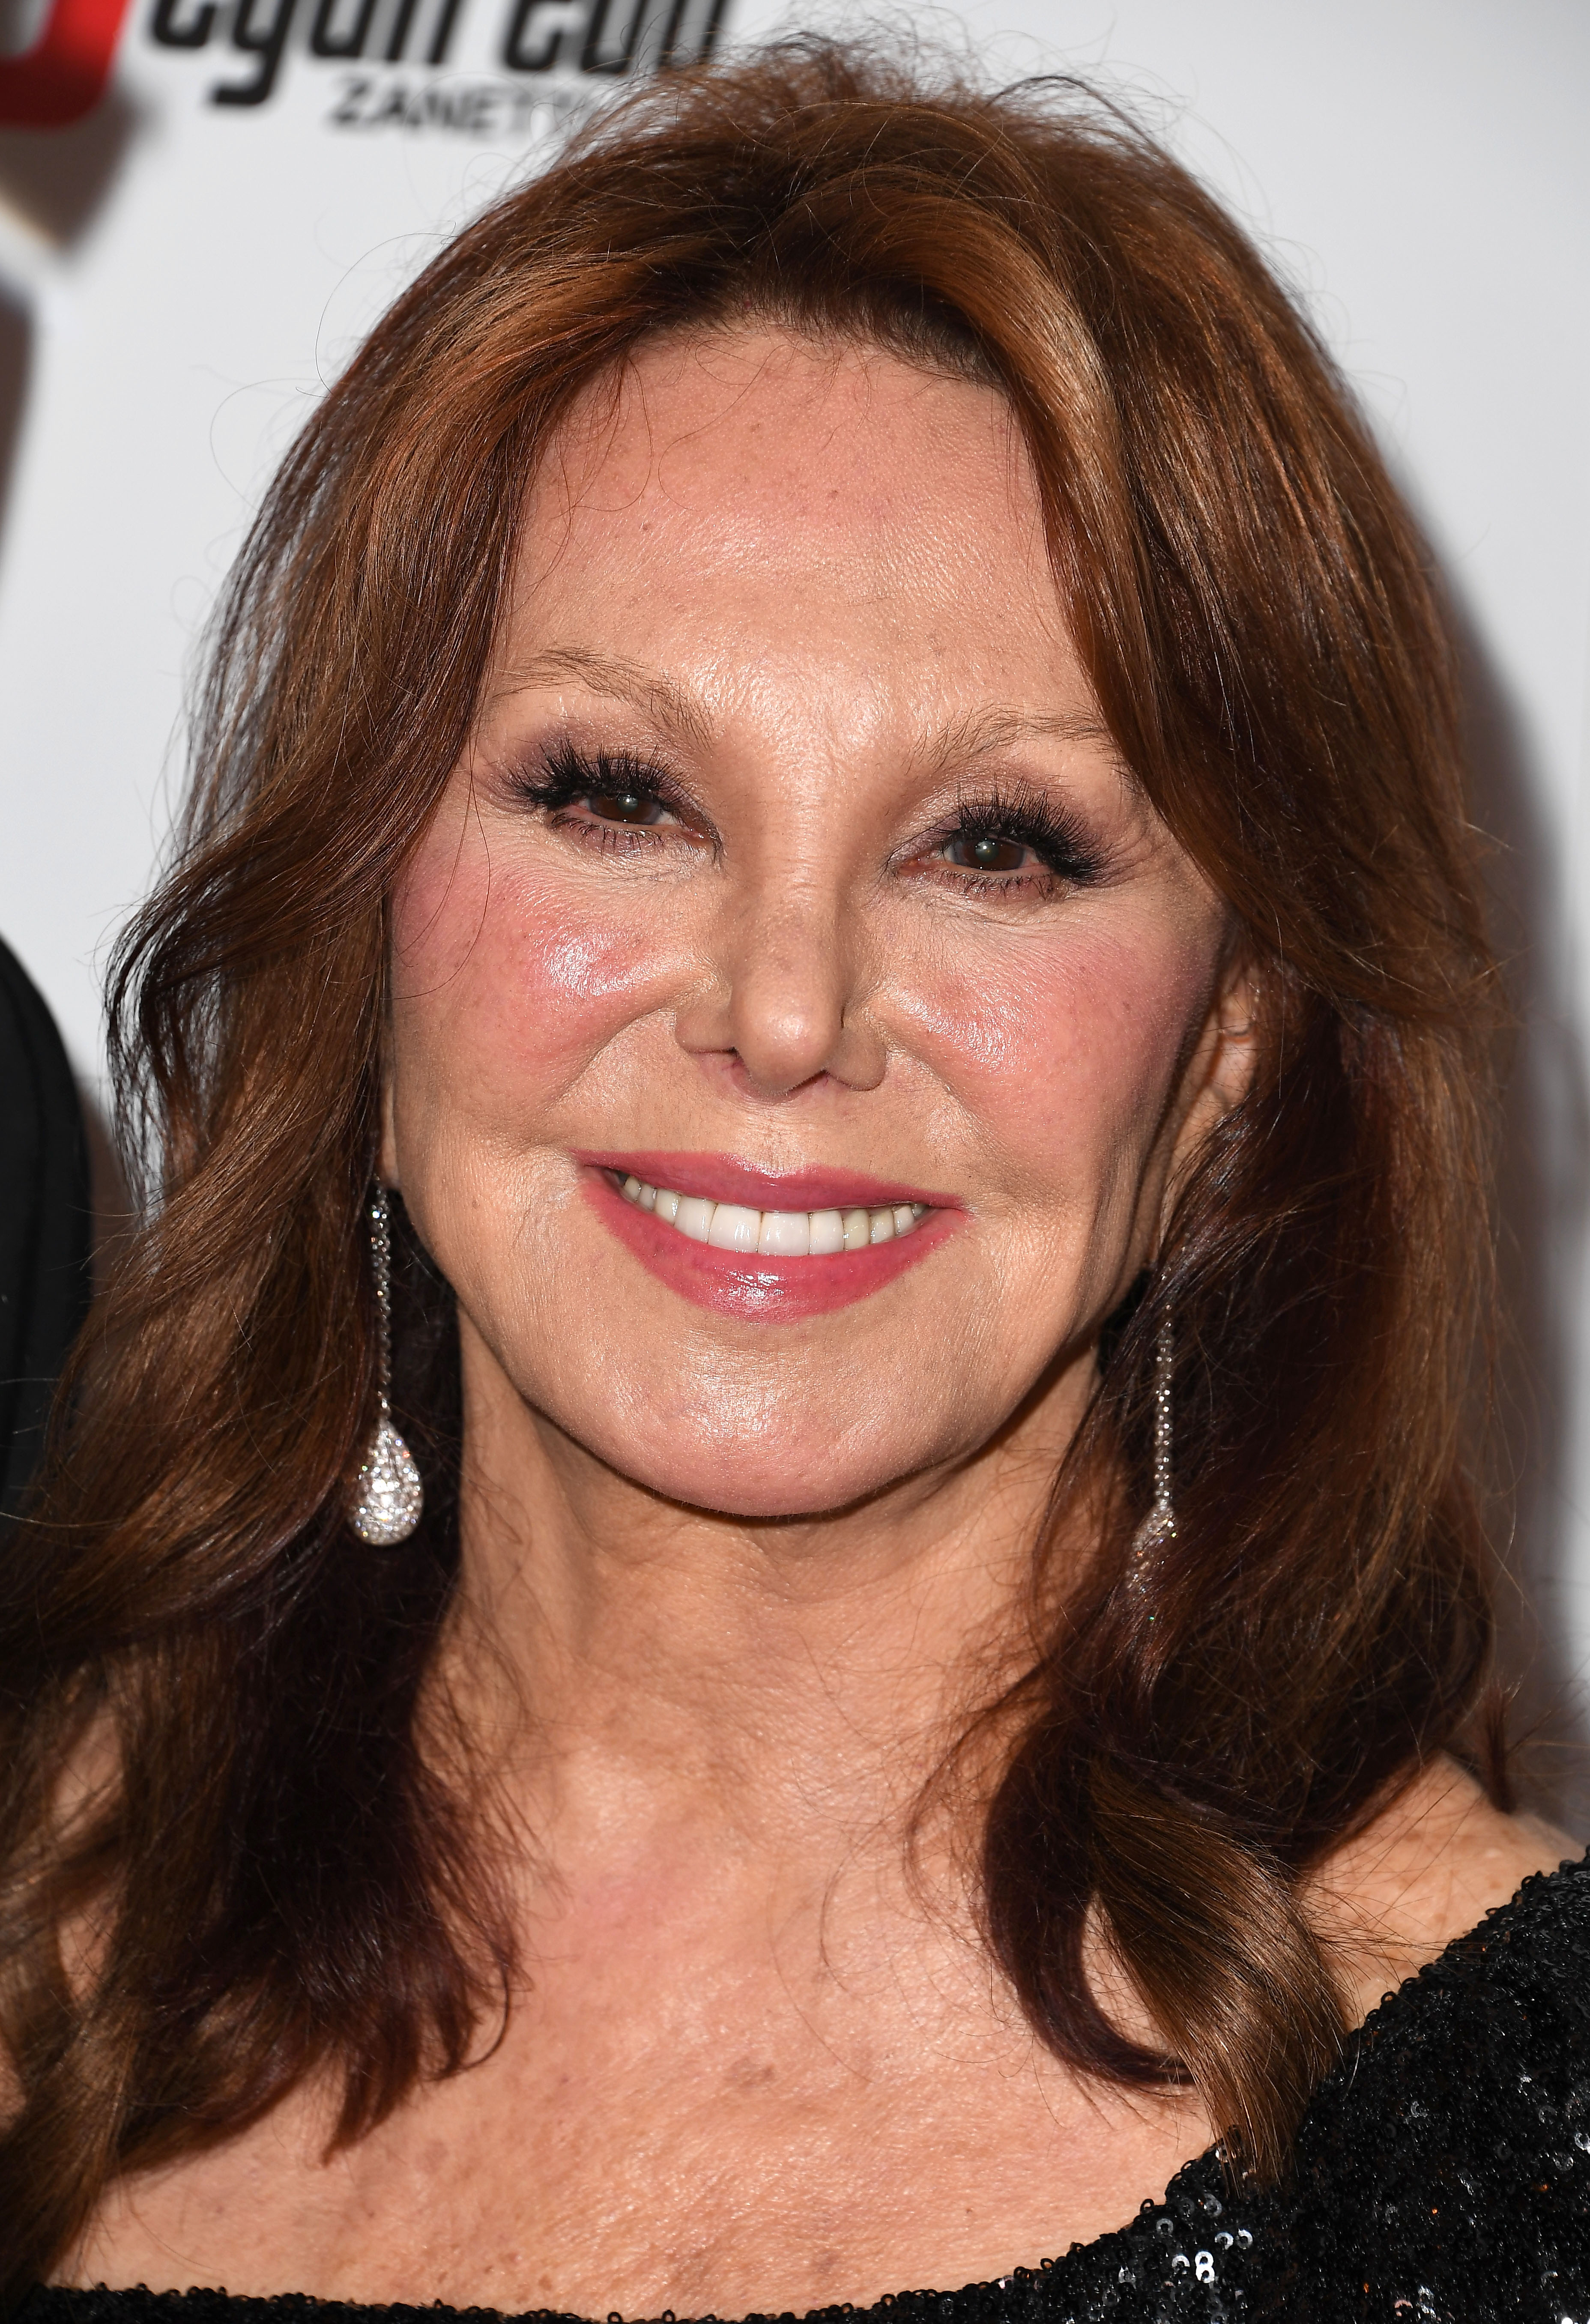 Marlo Thomas arrives at the American Icon Awards in Beverly Hills, California, on May 19, 2019. | Source: Getty Images